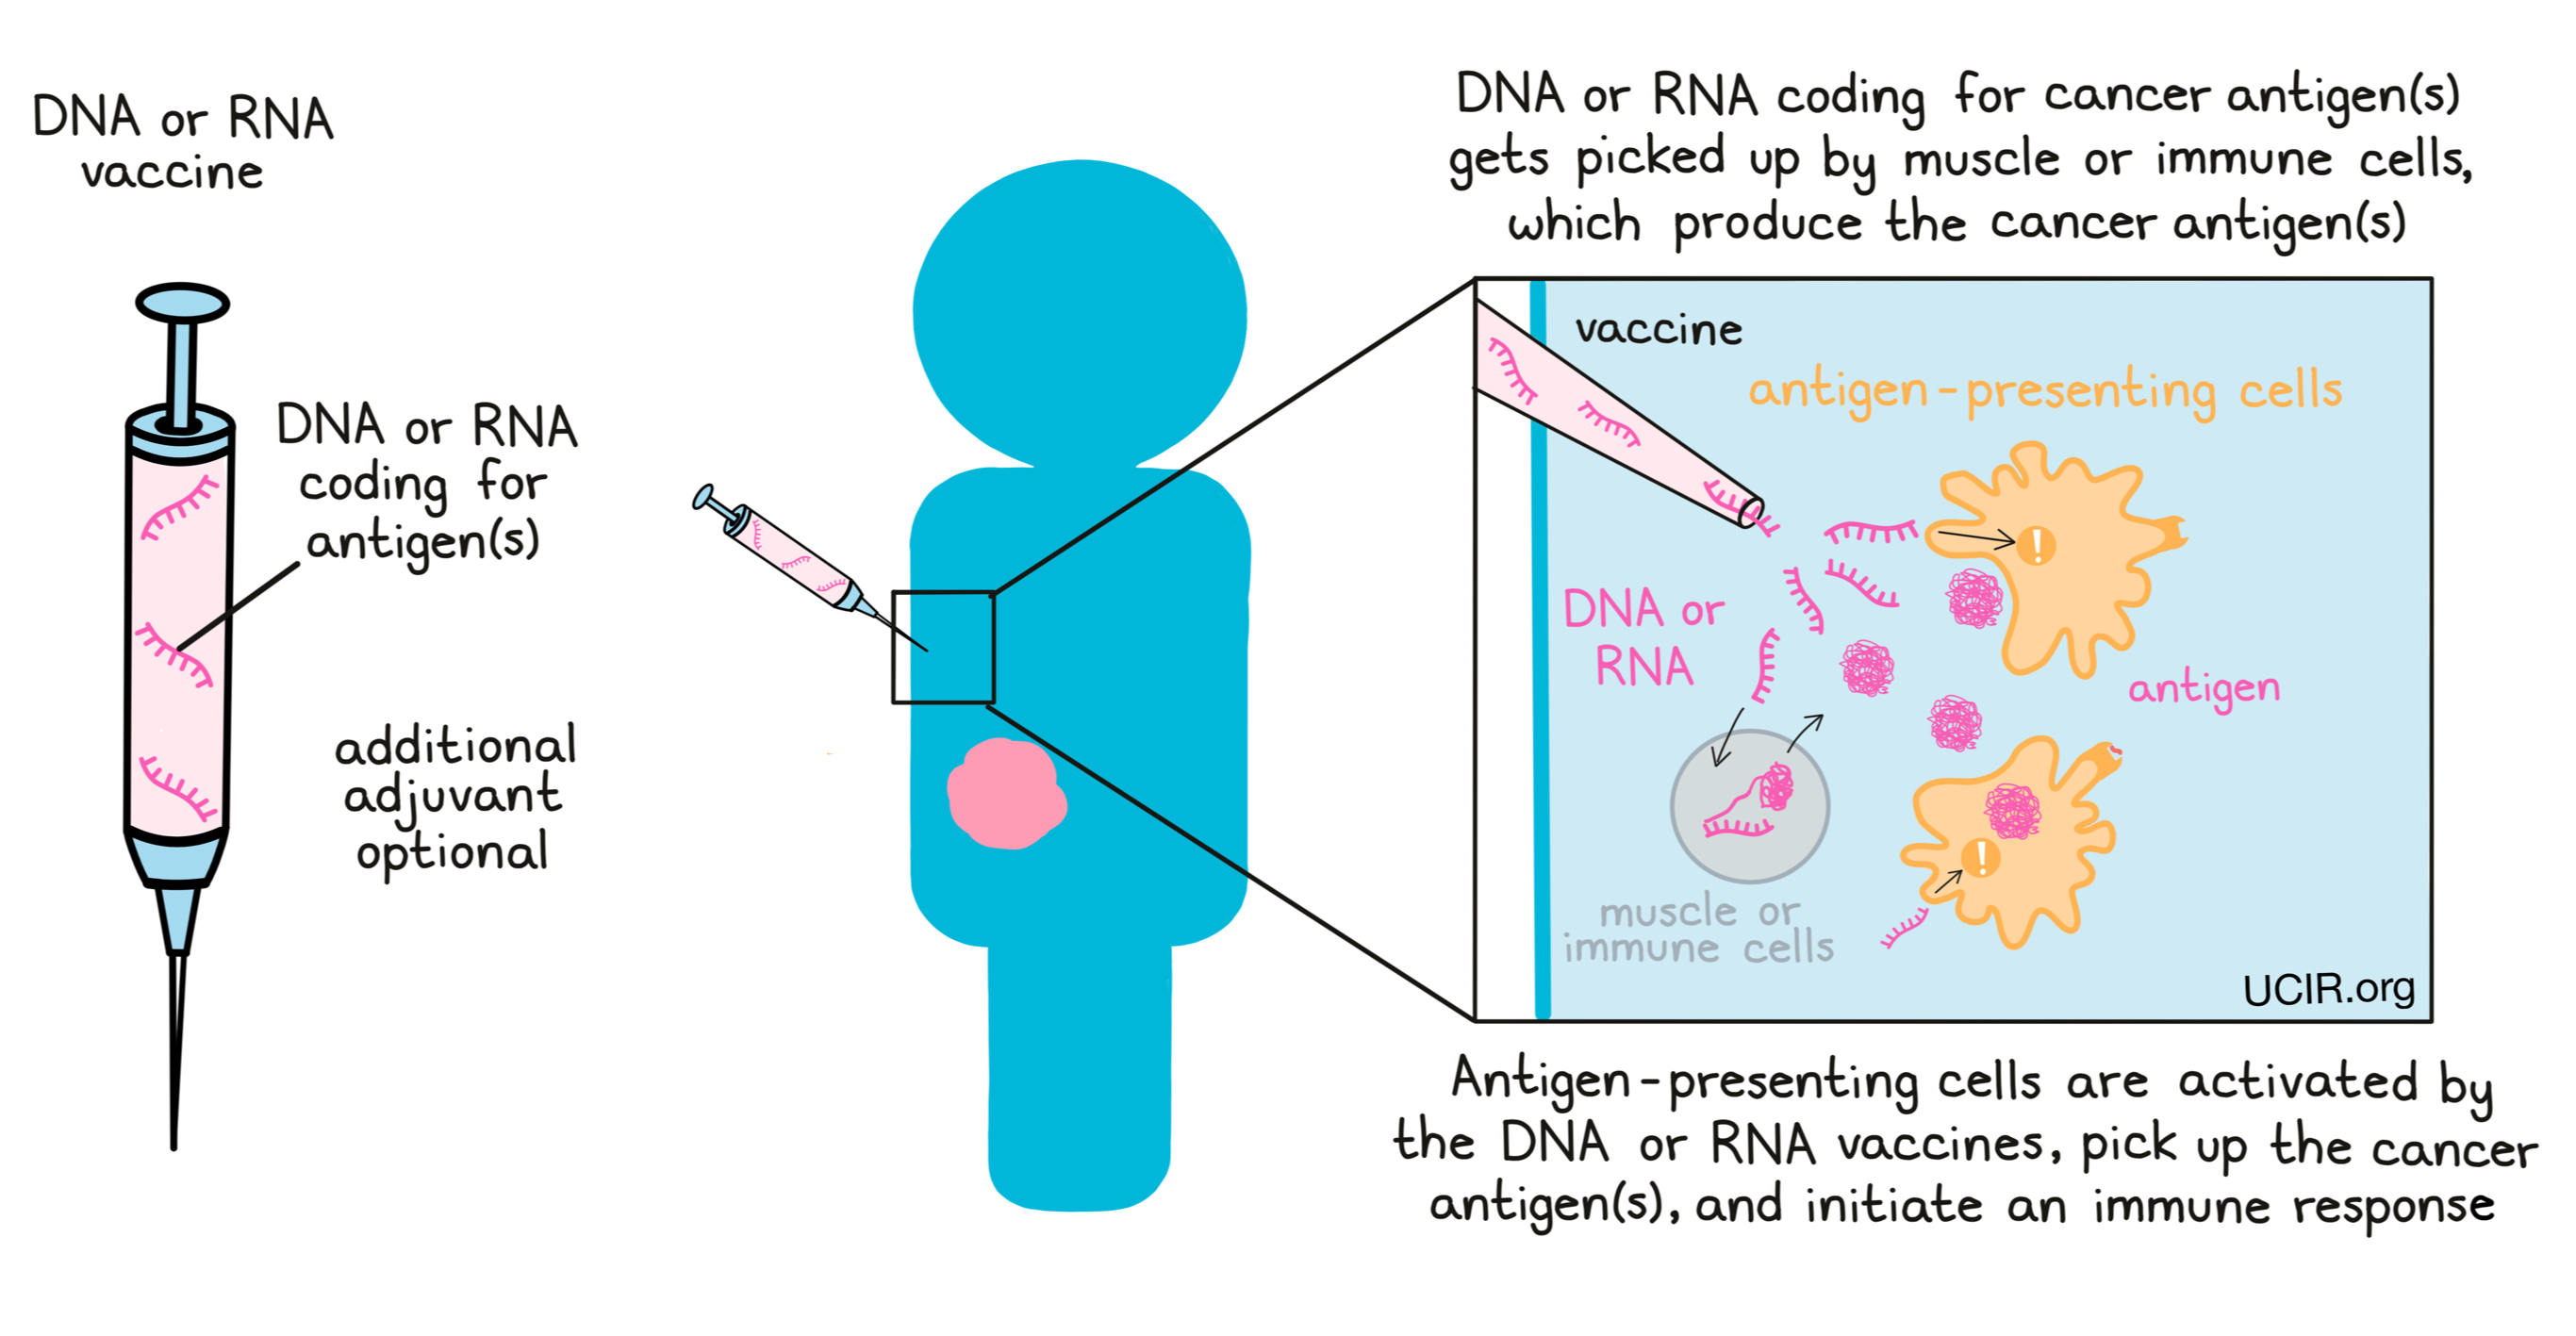 Some vaccines are made using DNA or RNA, which code for the cancer antigens